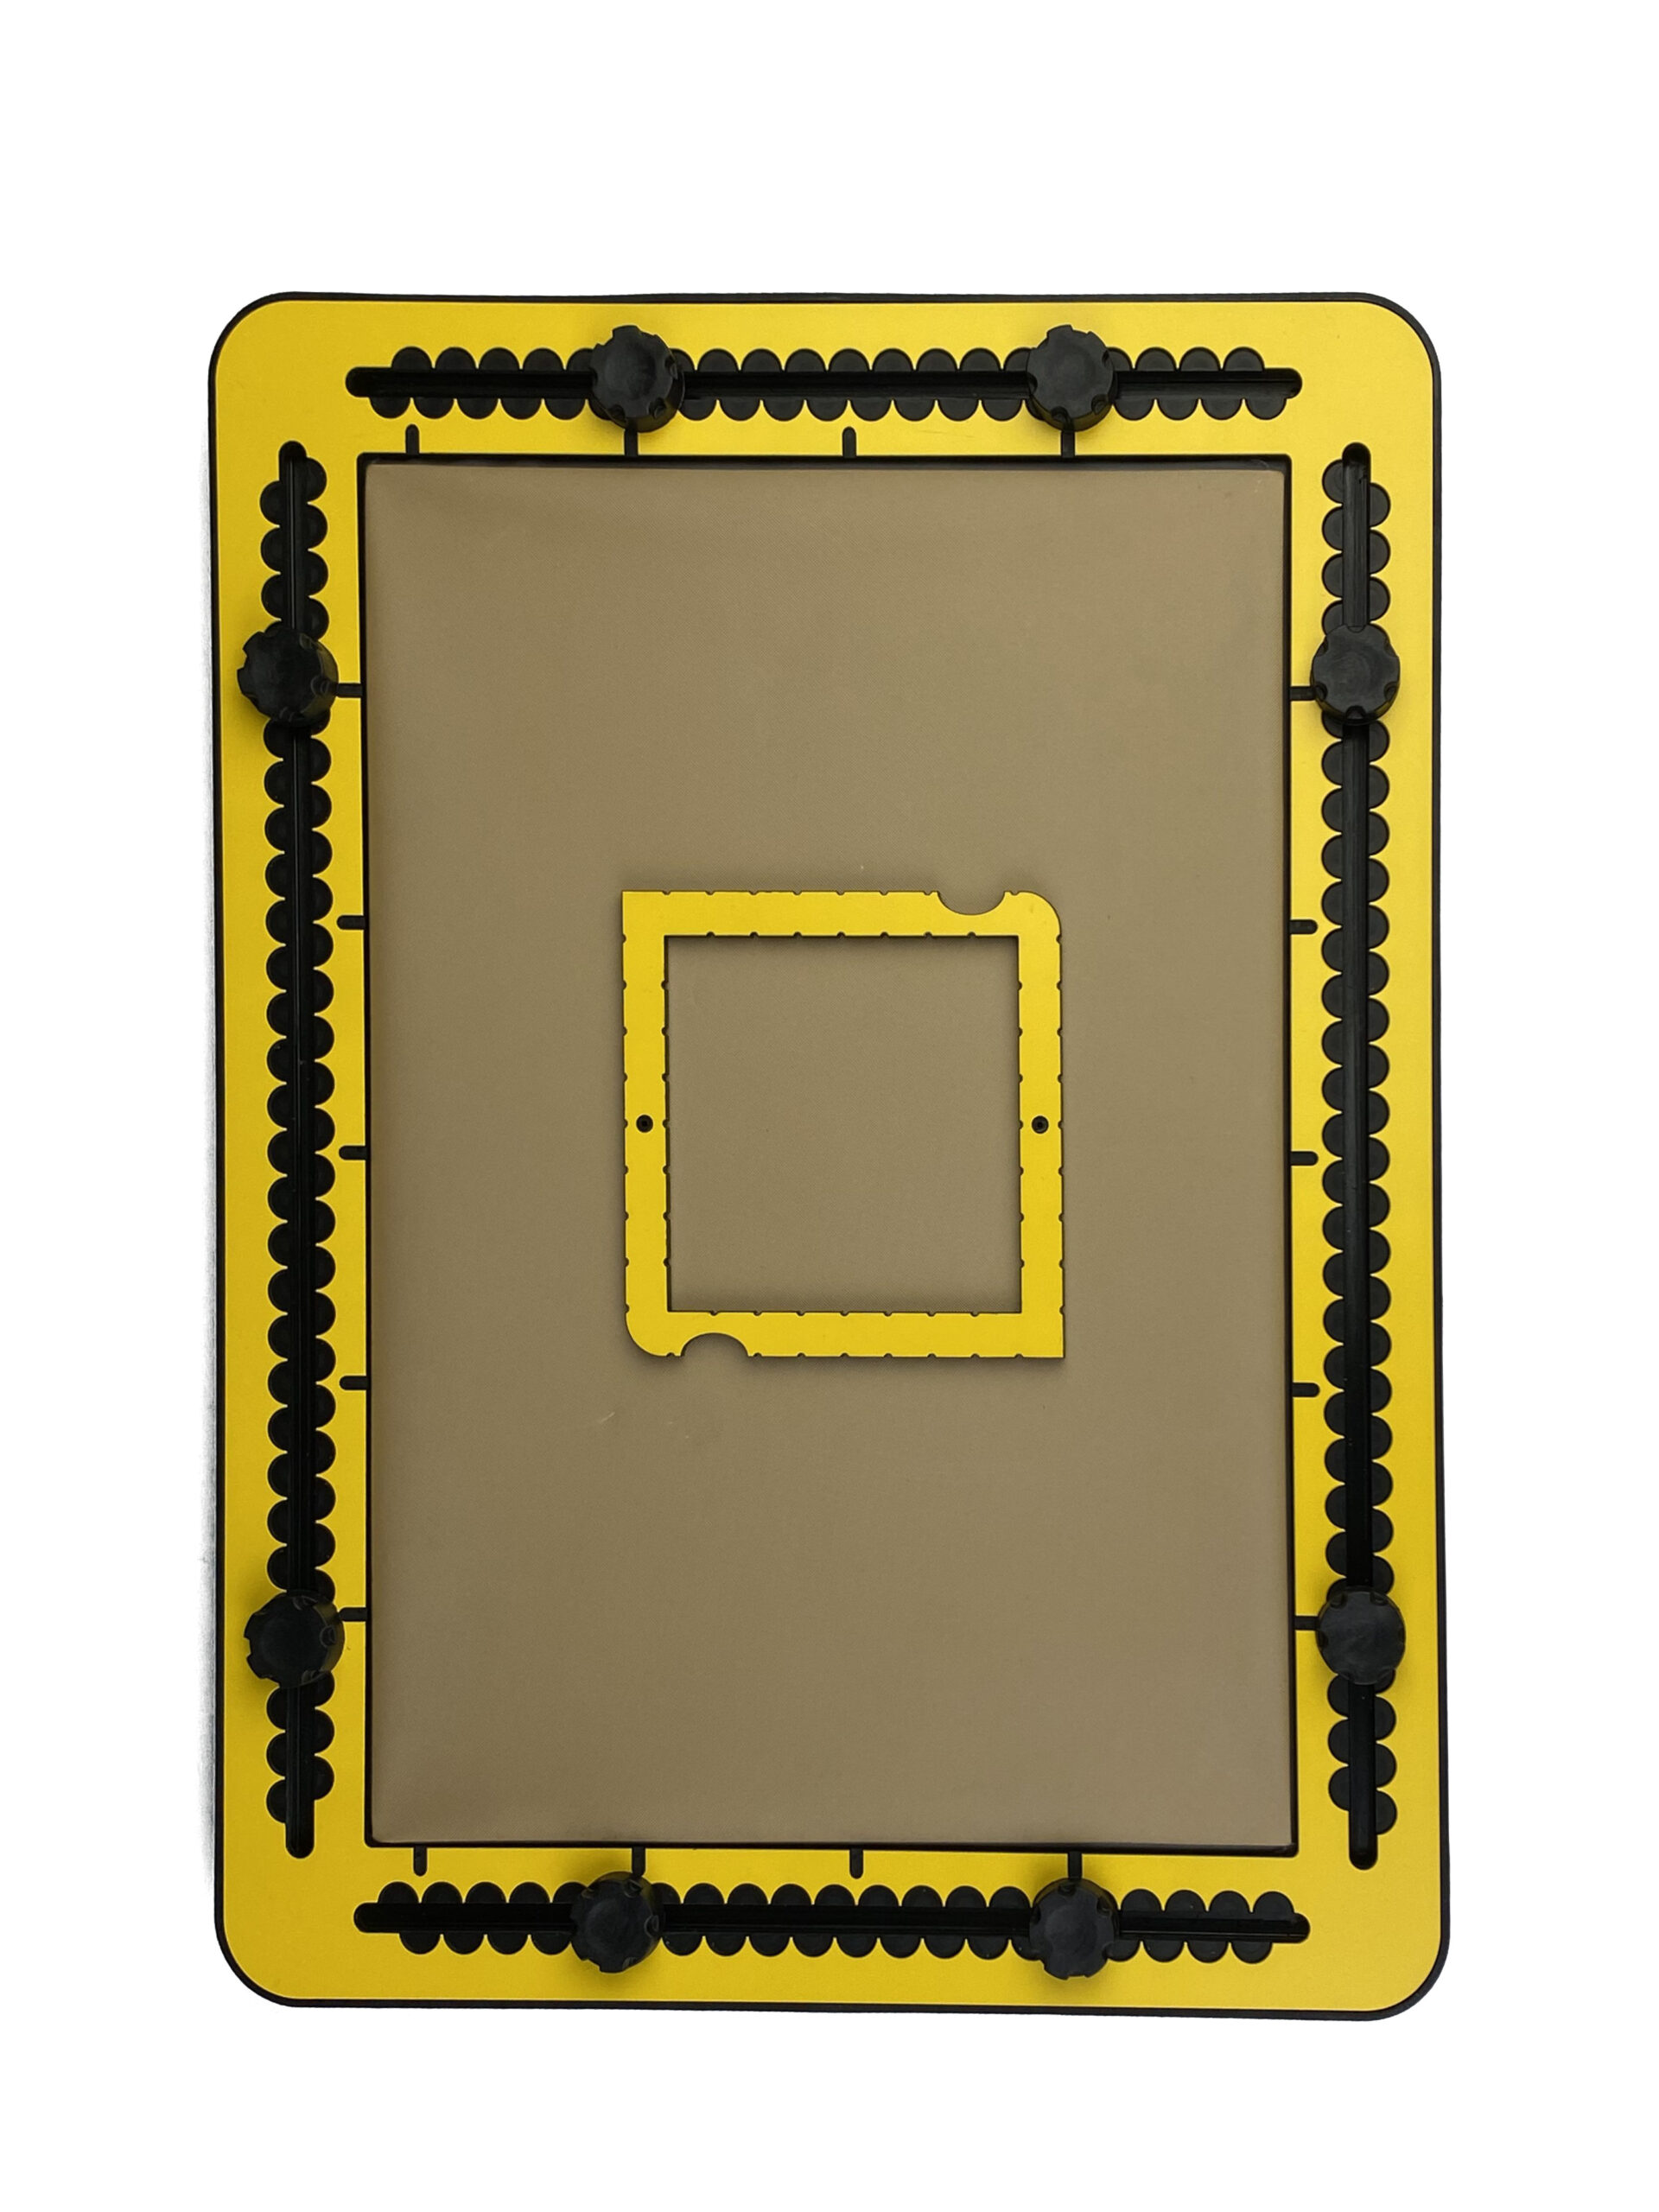 Photo of the Square Template on the TactiPad